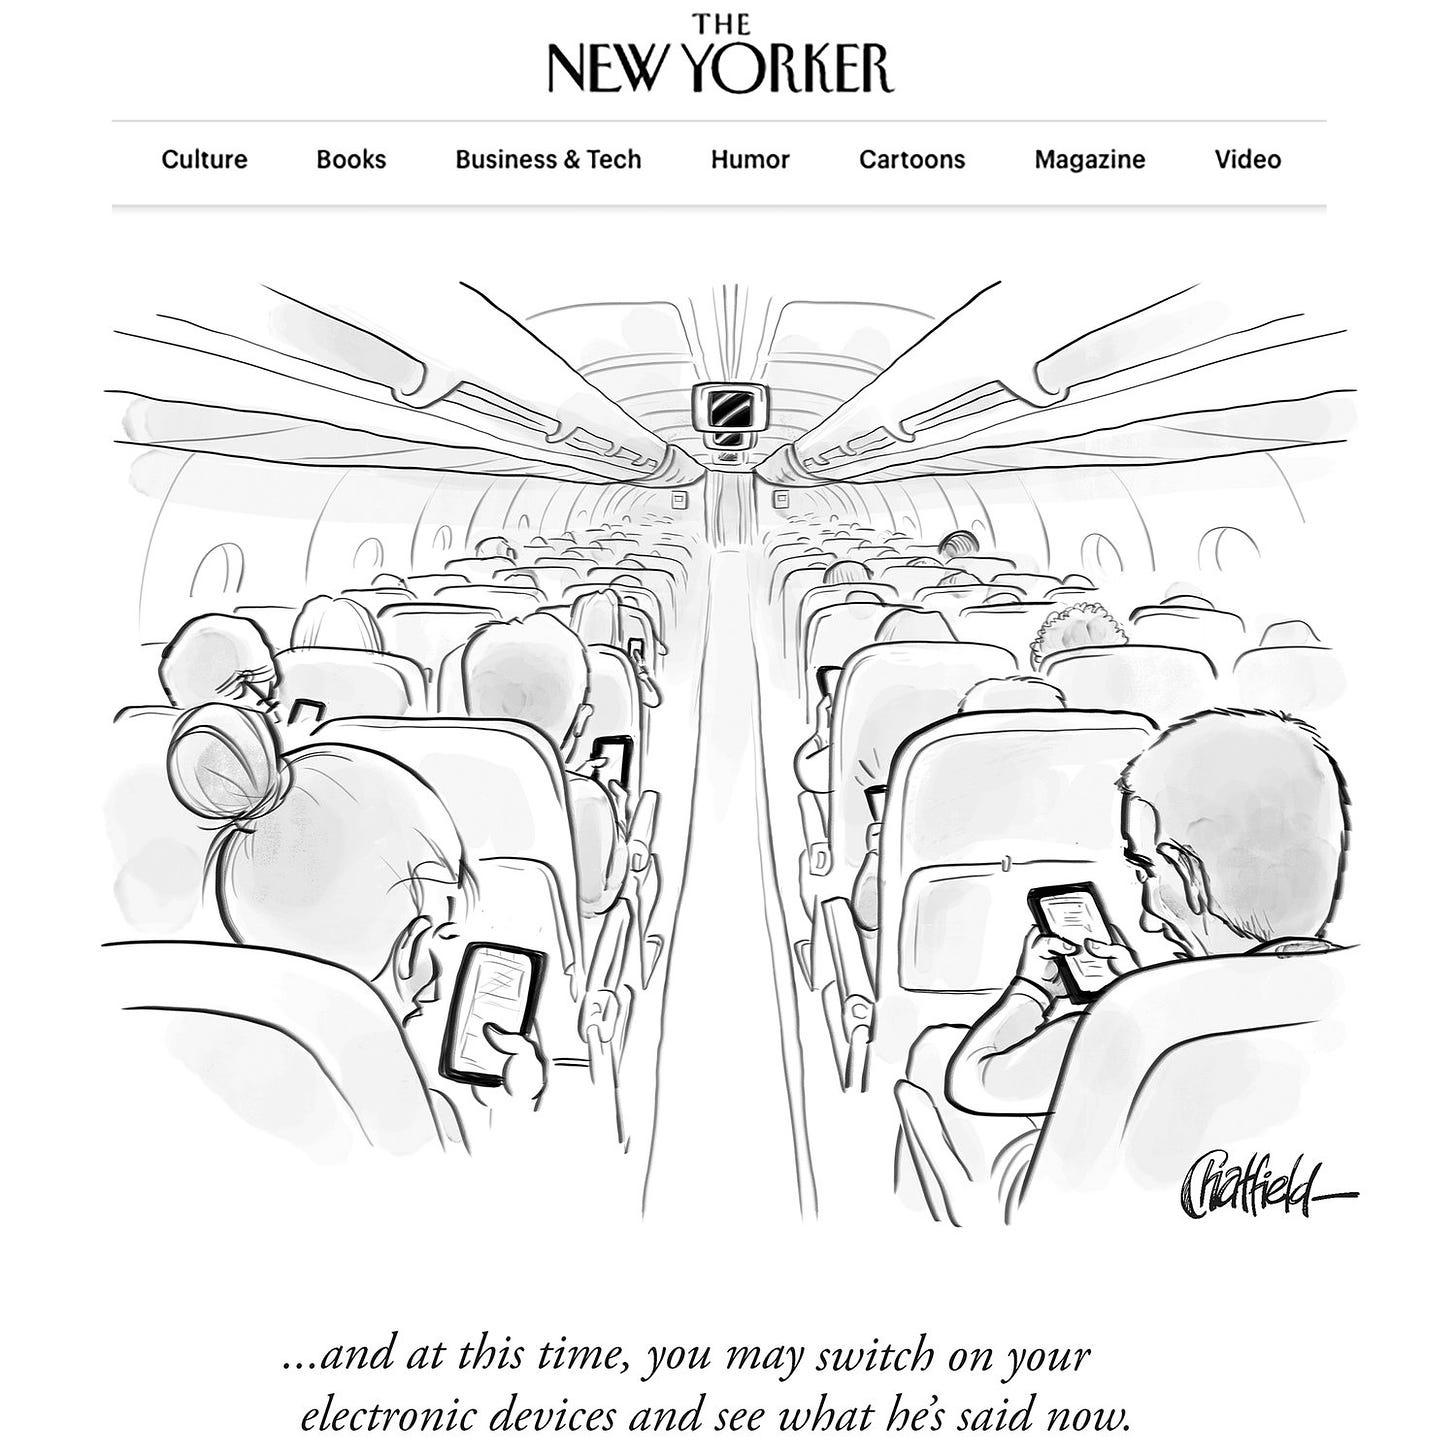 Today's New Yorker Daily Cartoon: See what he's said now... - New Yorker  Cartoonist Jason Chatfield